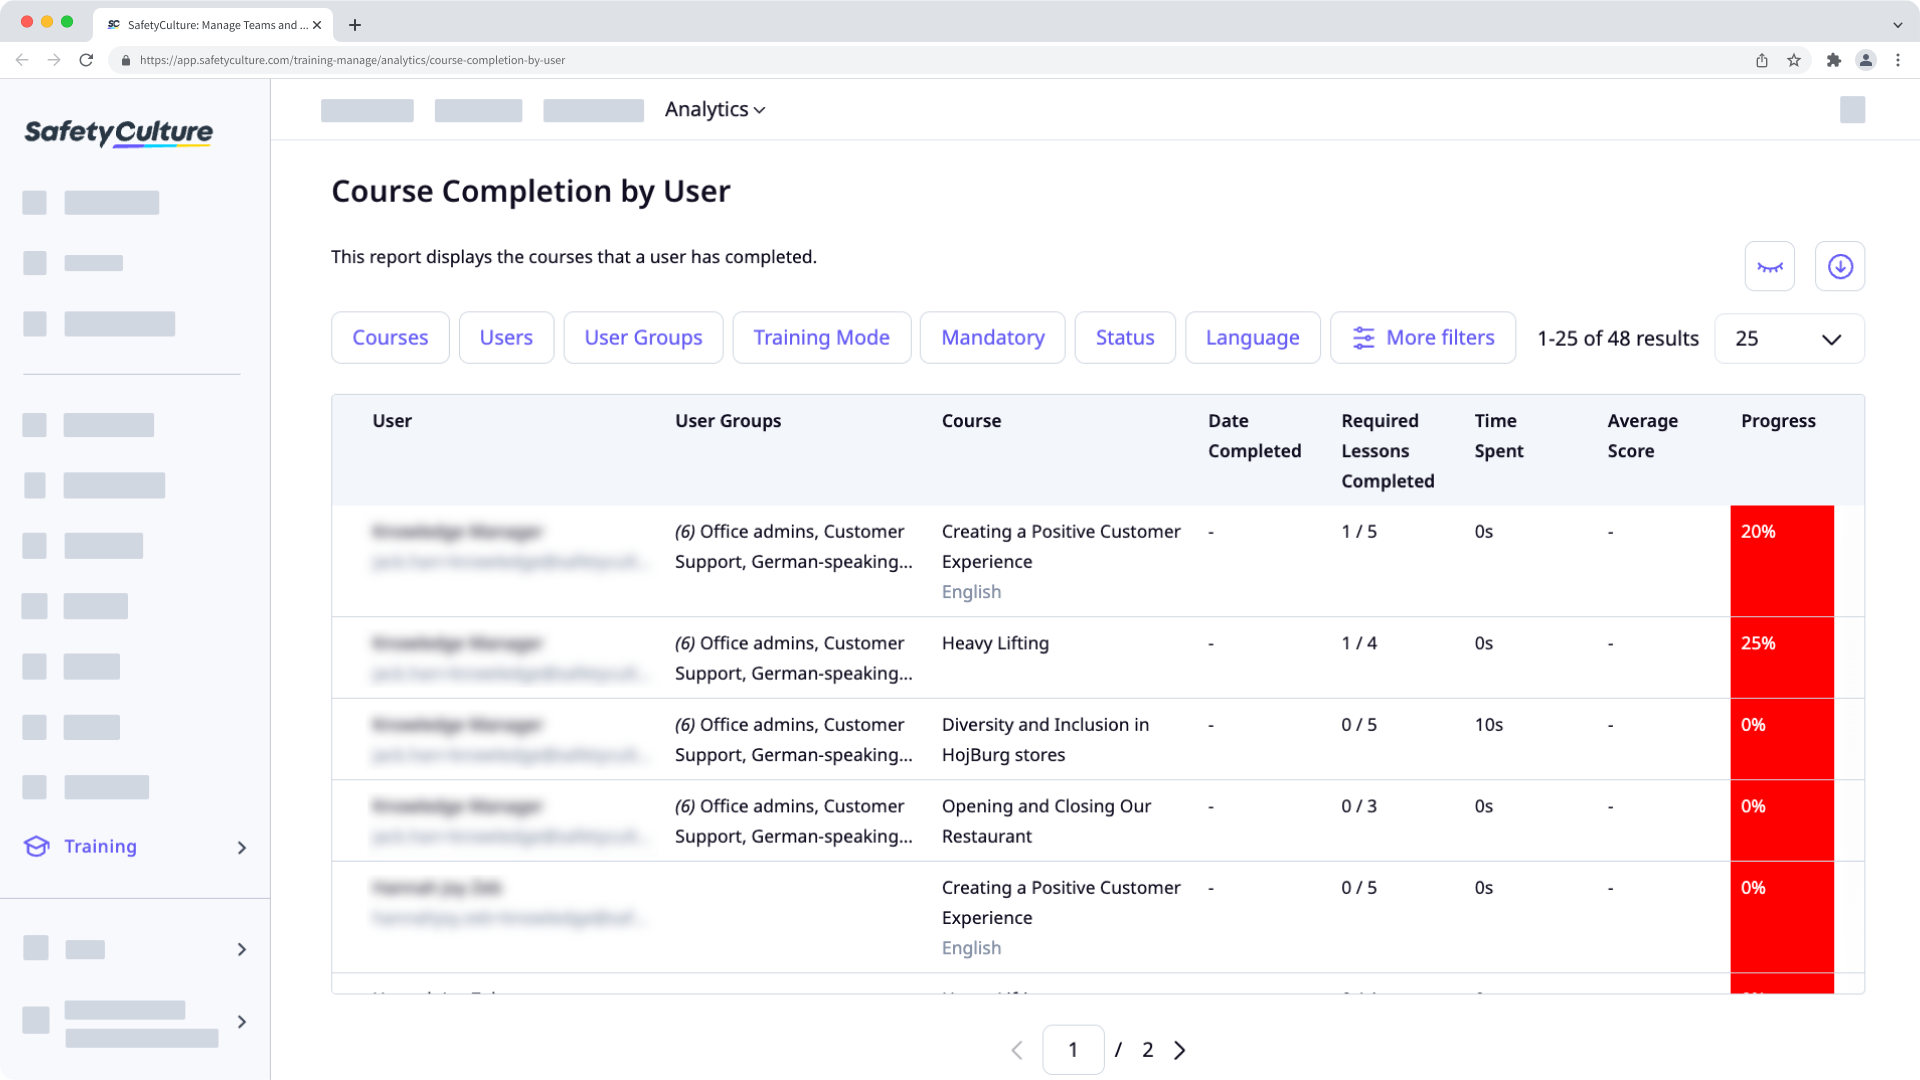 View course completion by users analytics for the Training feature via the web app.